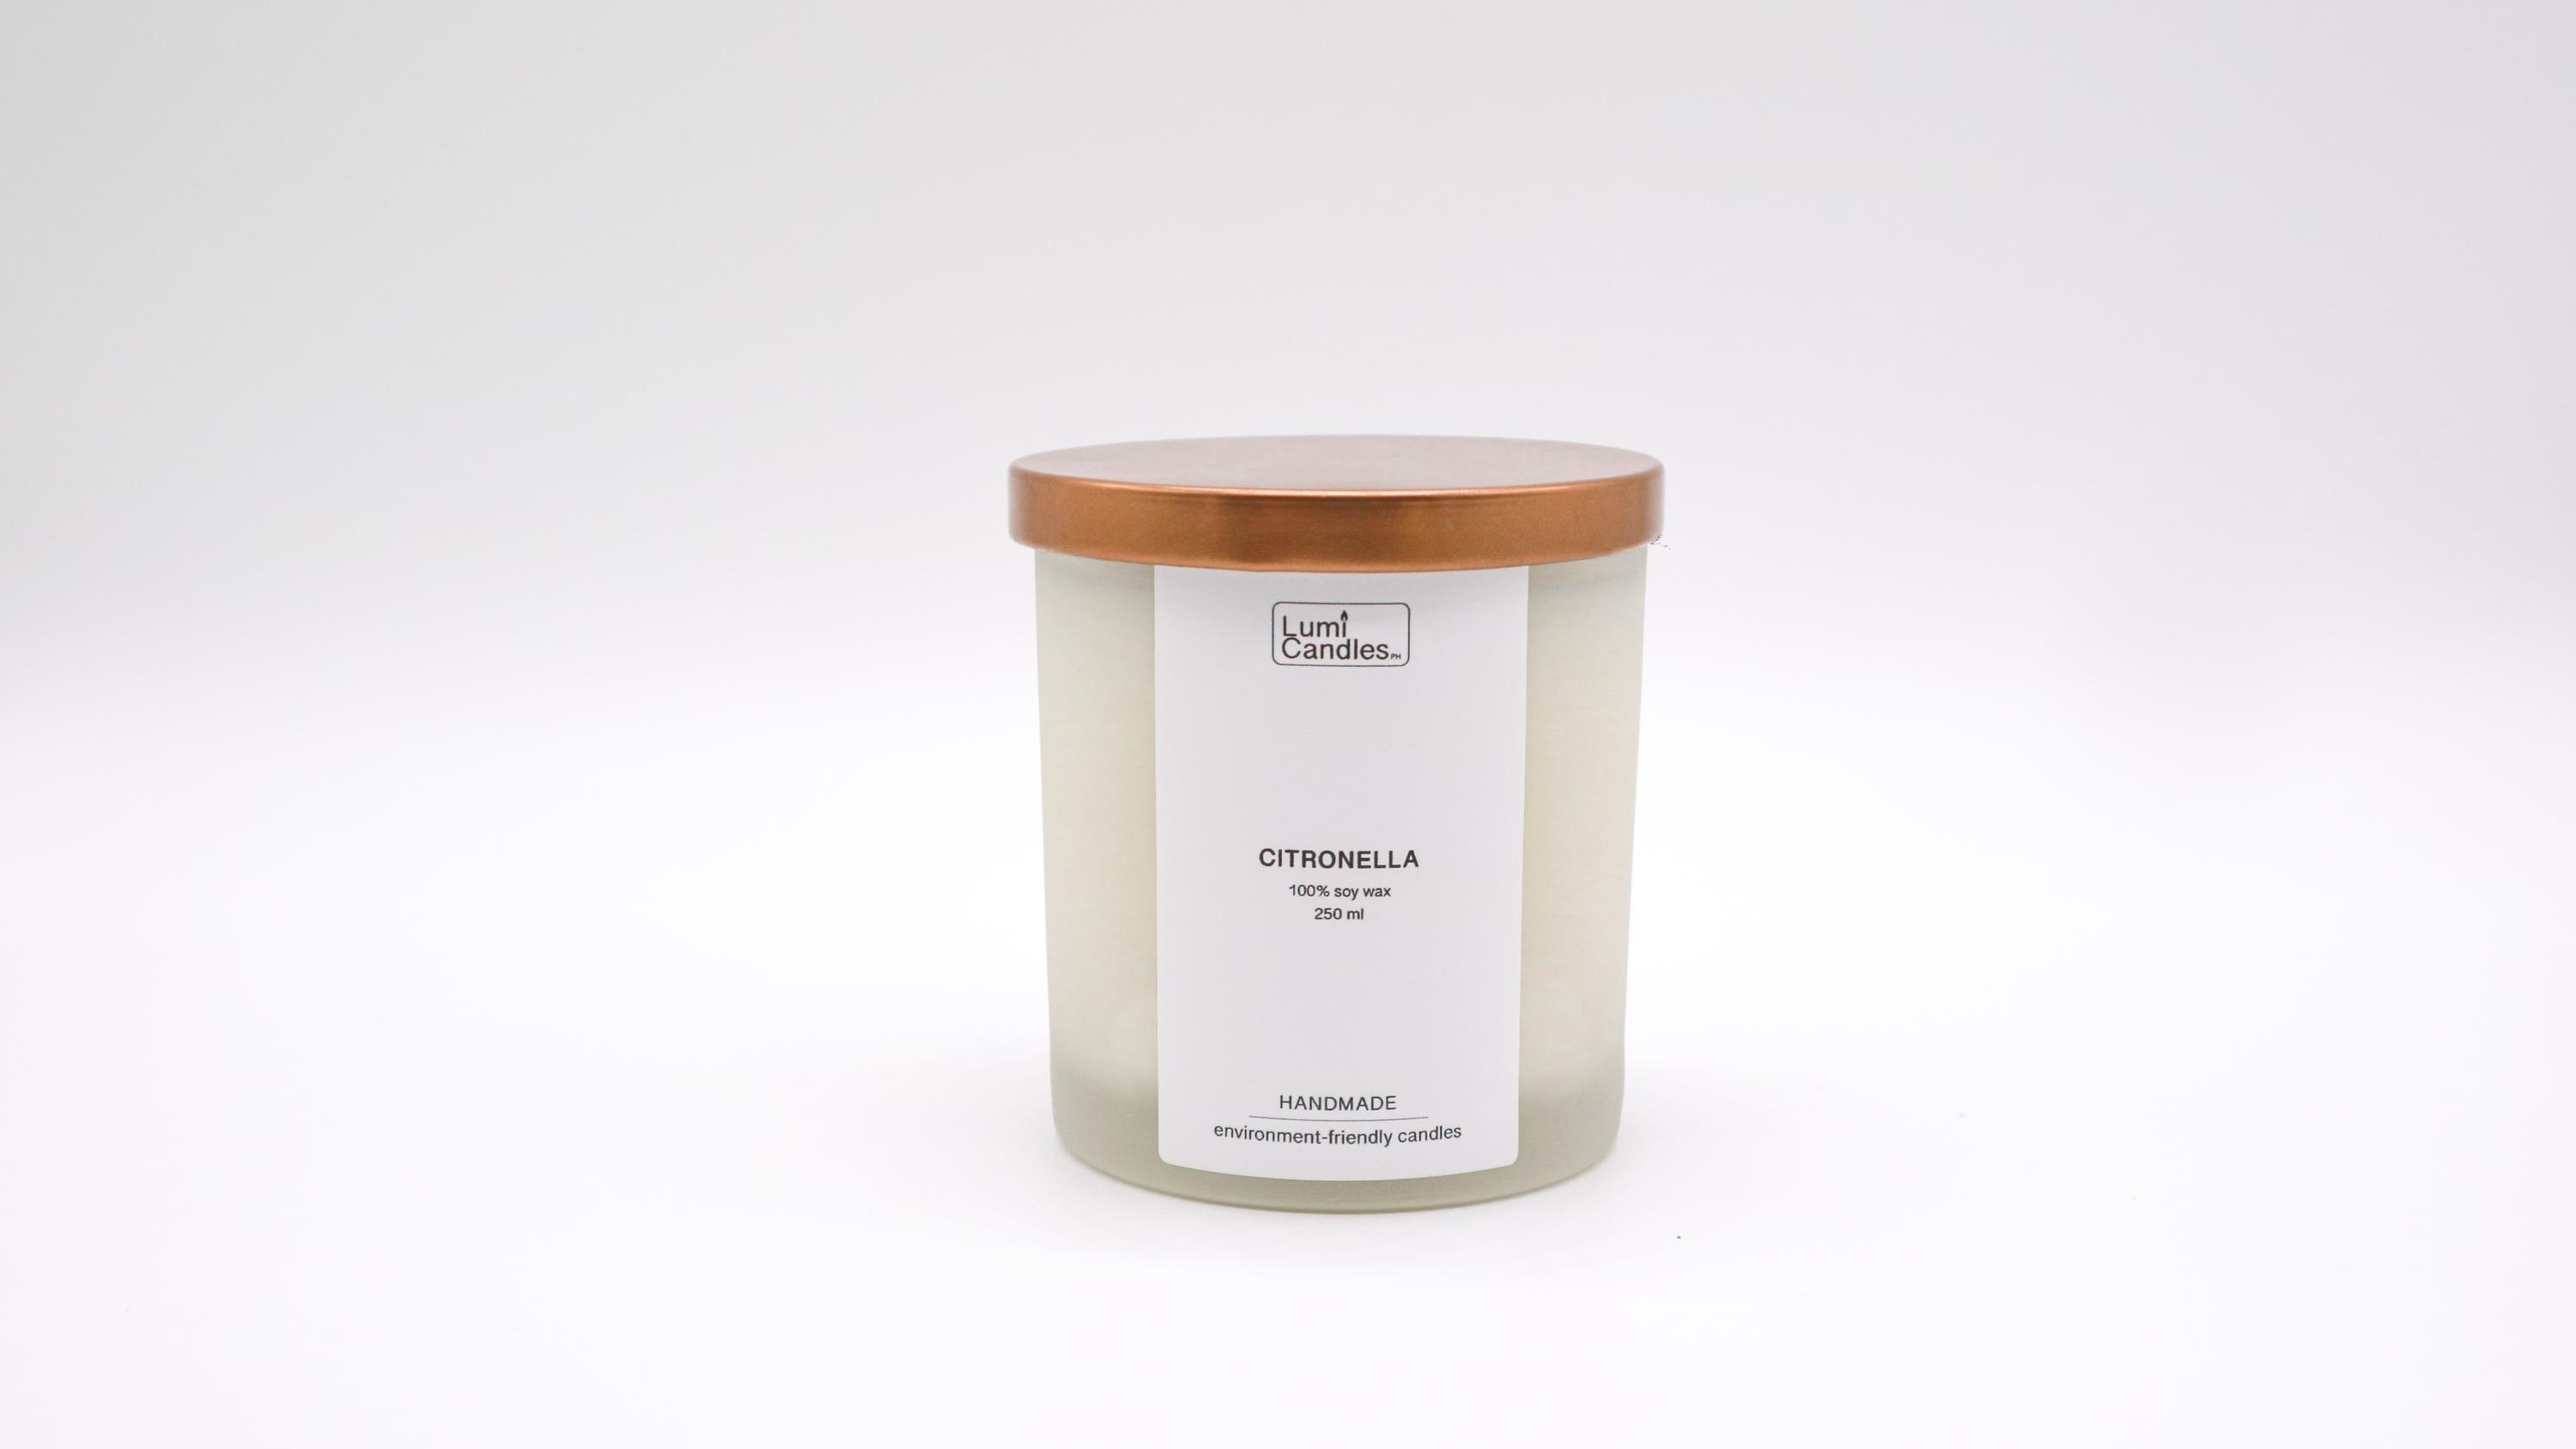 Citronella LUMI scented candle at 250 ML by LUMI Candles PH